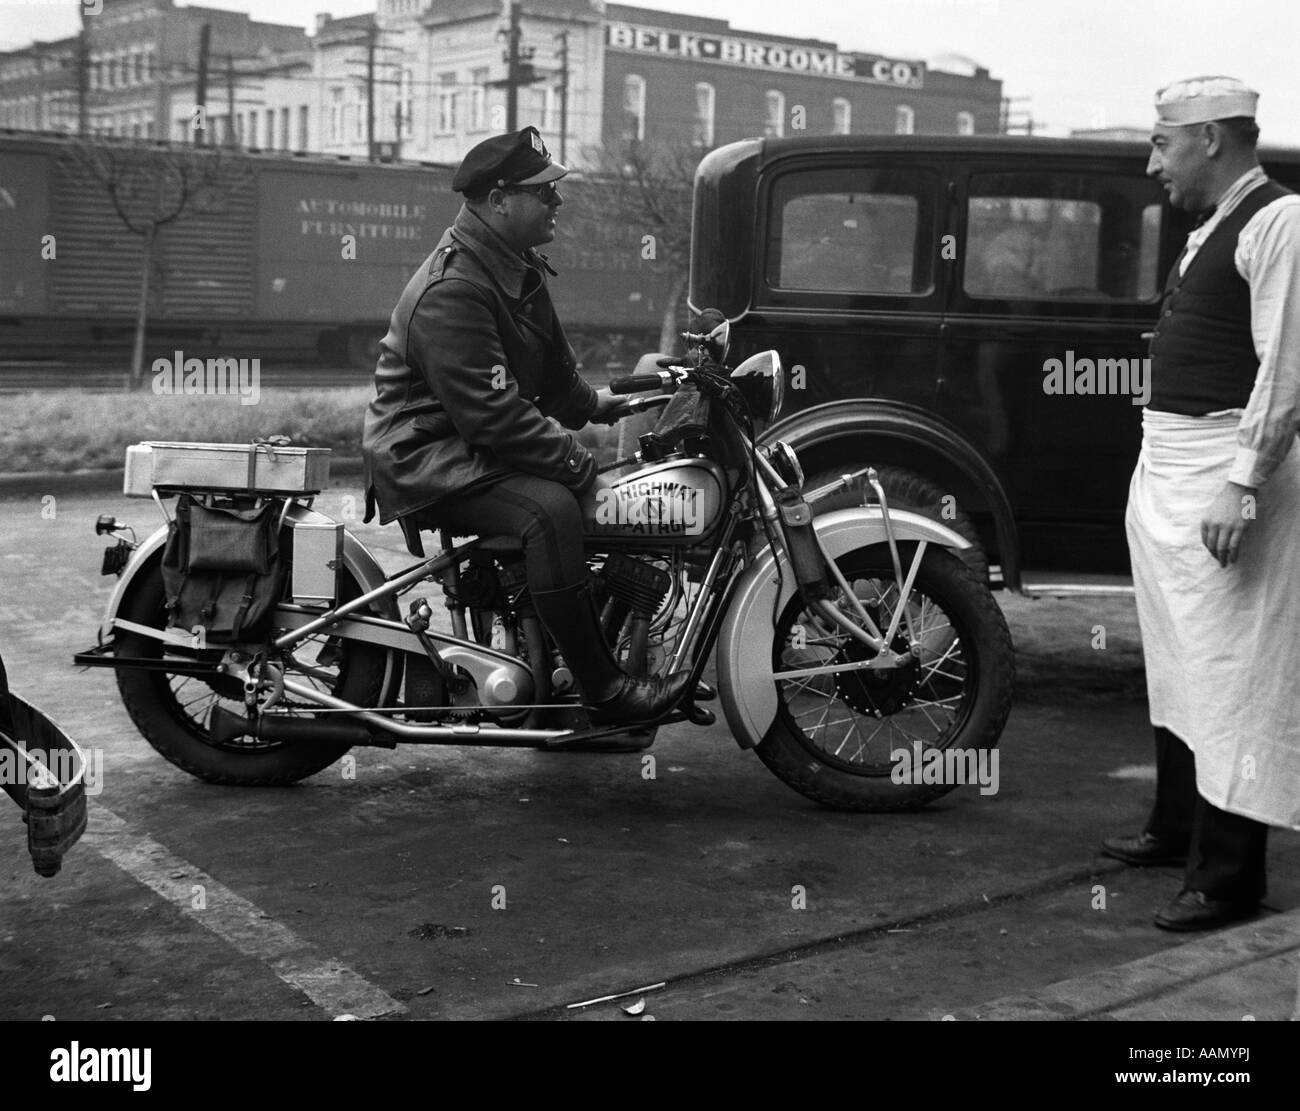 1930s NORTH CAROLINA MOTORCYCLE HIGHWAY PATROL POLICE OFFICERS PULL UP TO CURB TO TALK WITH LUNCH ROOM MAN Stock Photo